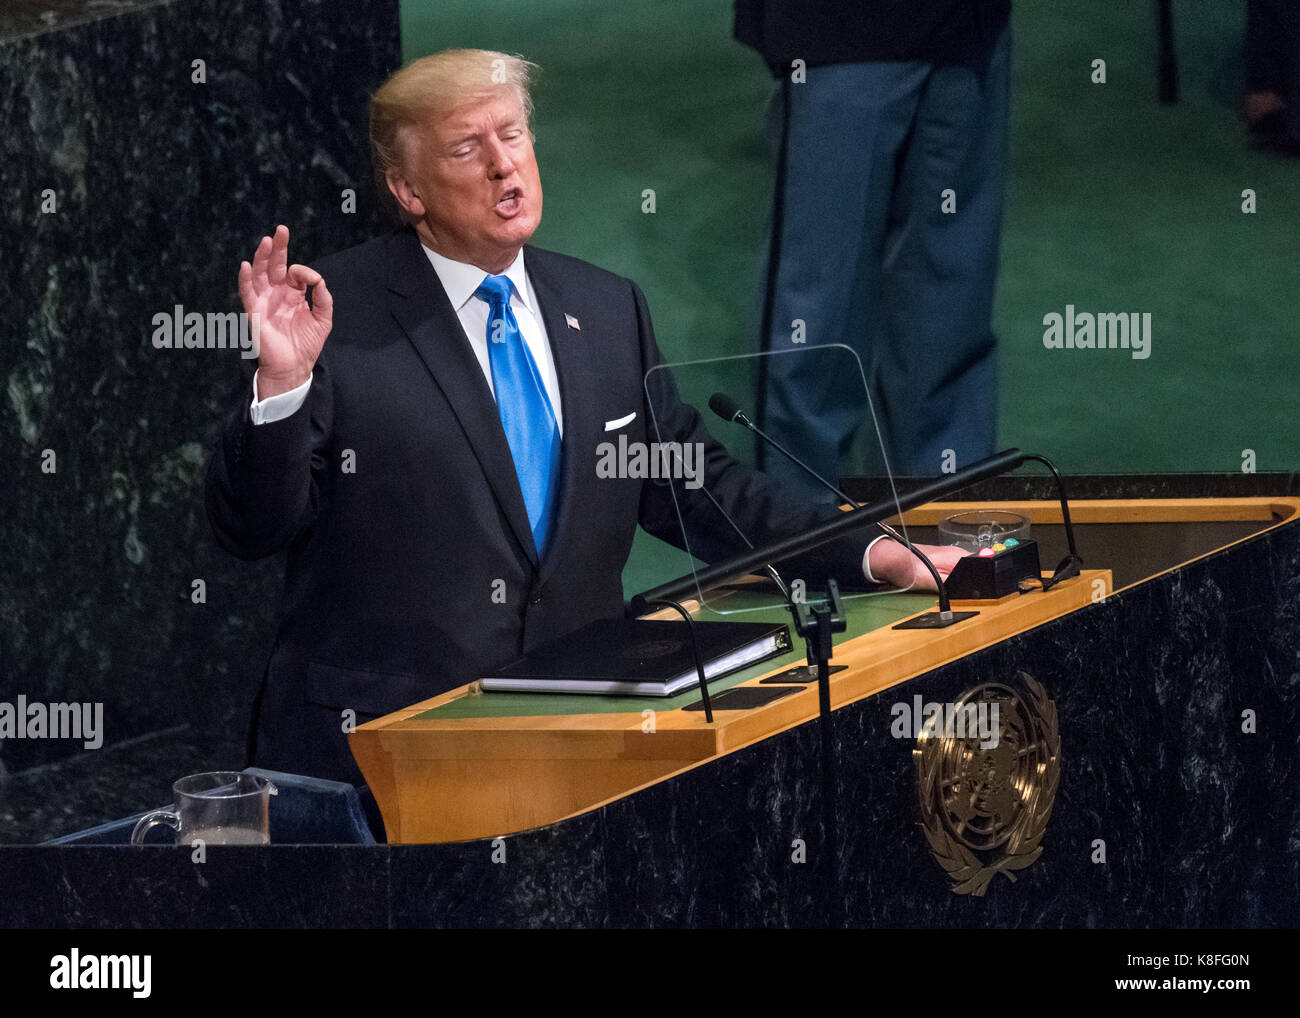 New York, USA, 19 September, 2017.  United States President Donald Trump addresses the opening session of the 72st United Nations General Assembly in New York on September 17, 2017. Trump used his first ever address to the U.N. General Assembly to condemn North Korea and Iran. Enrique Shore/Alamy Live News Stock Photo